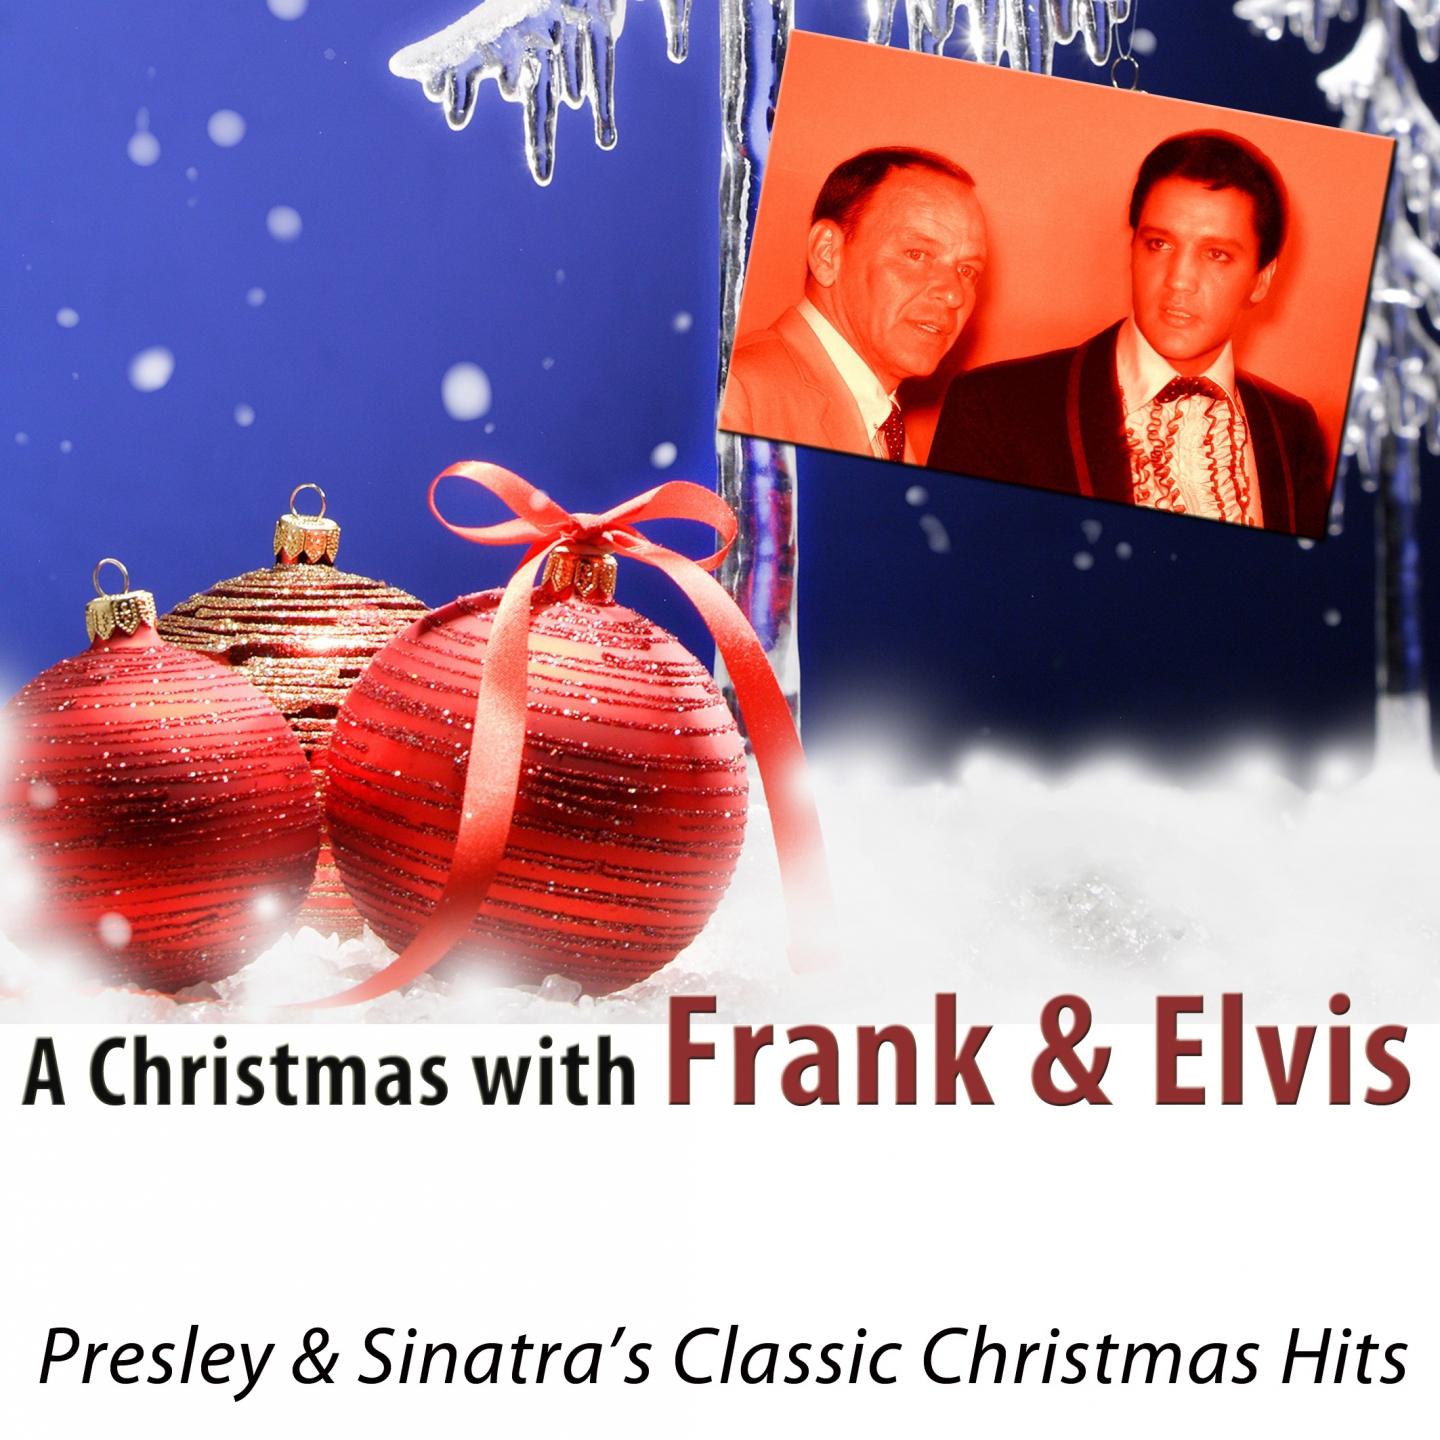 A Christmas with Frank and Elvis (Presley & Sinatra's Classic Christmas Hits)